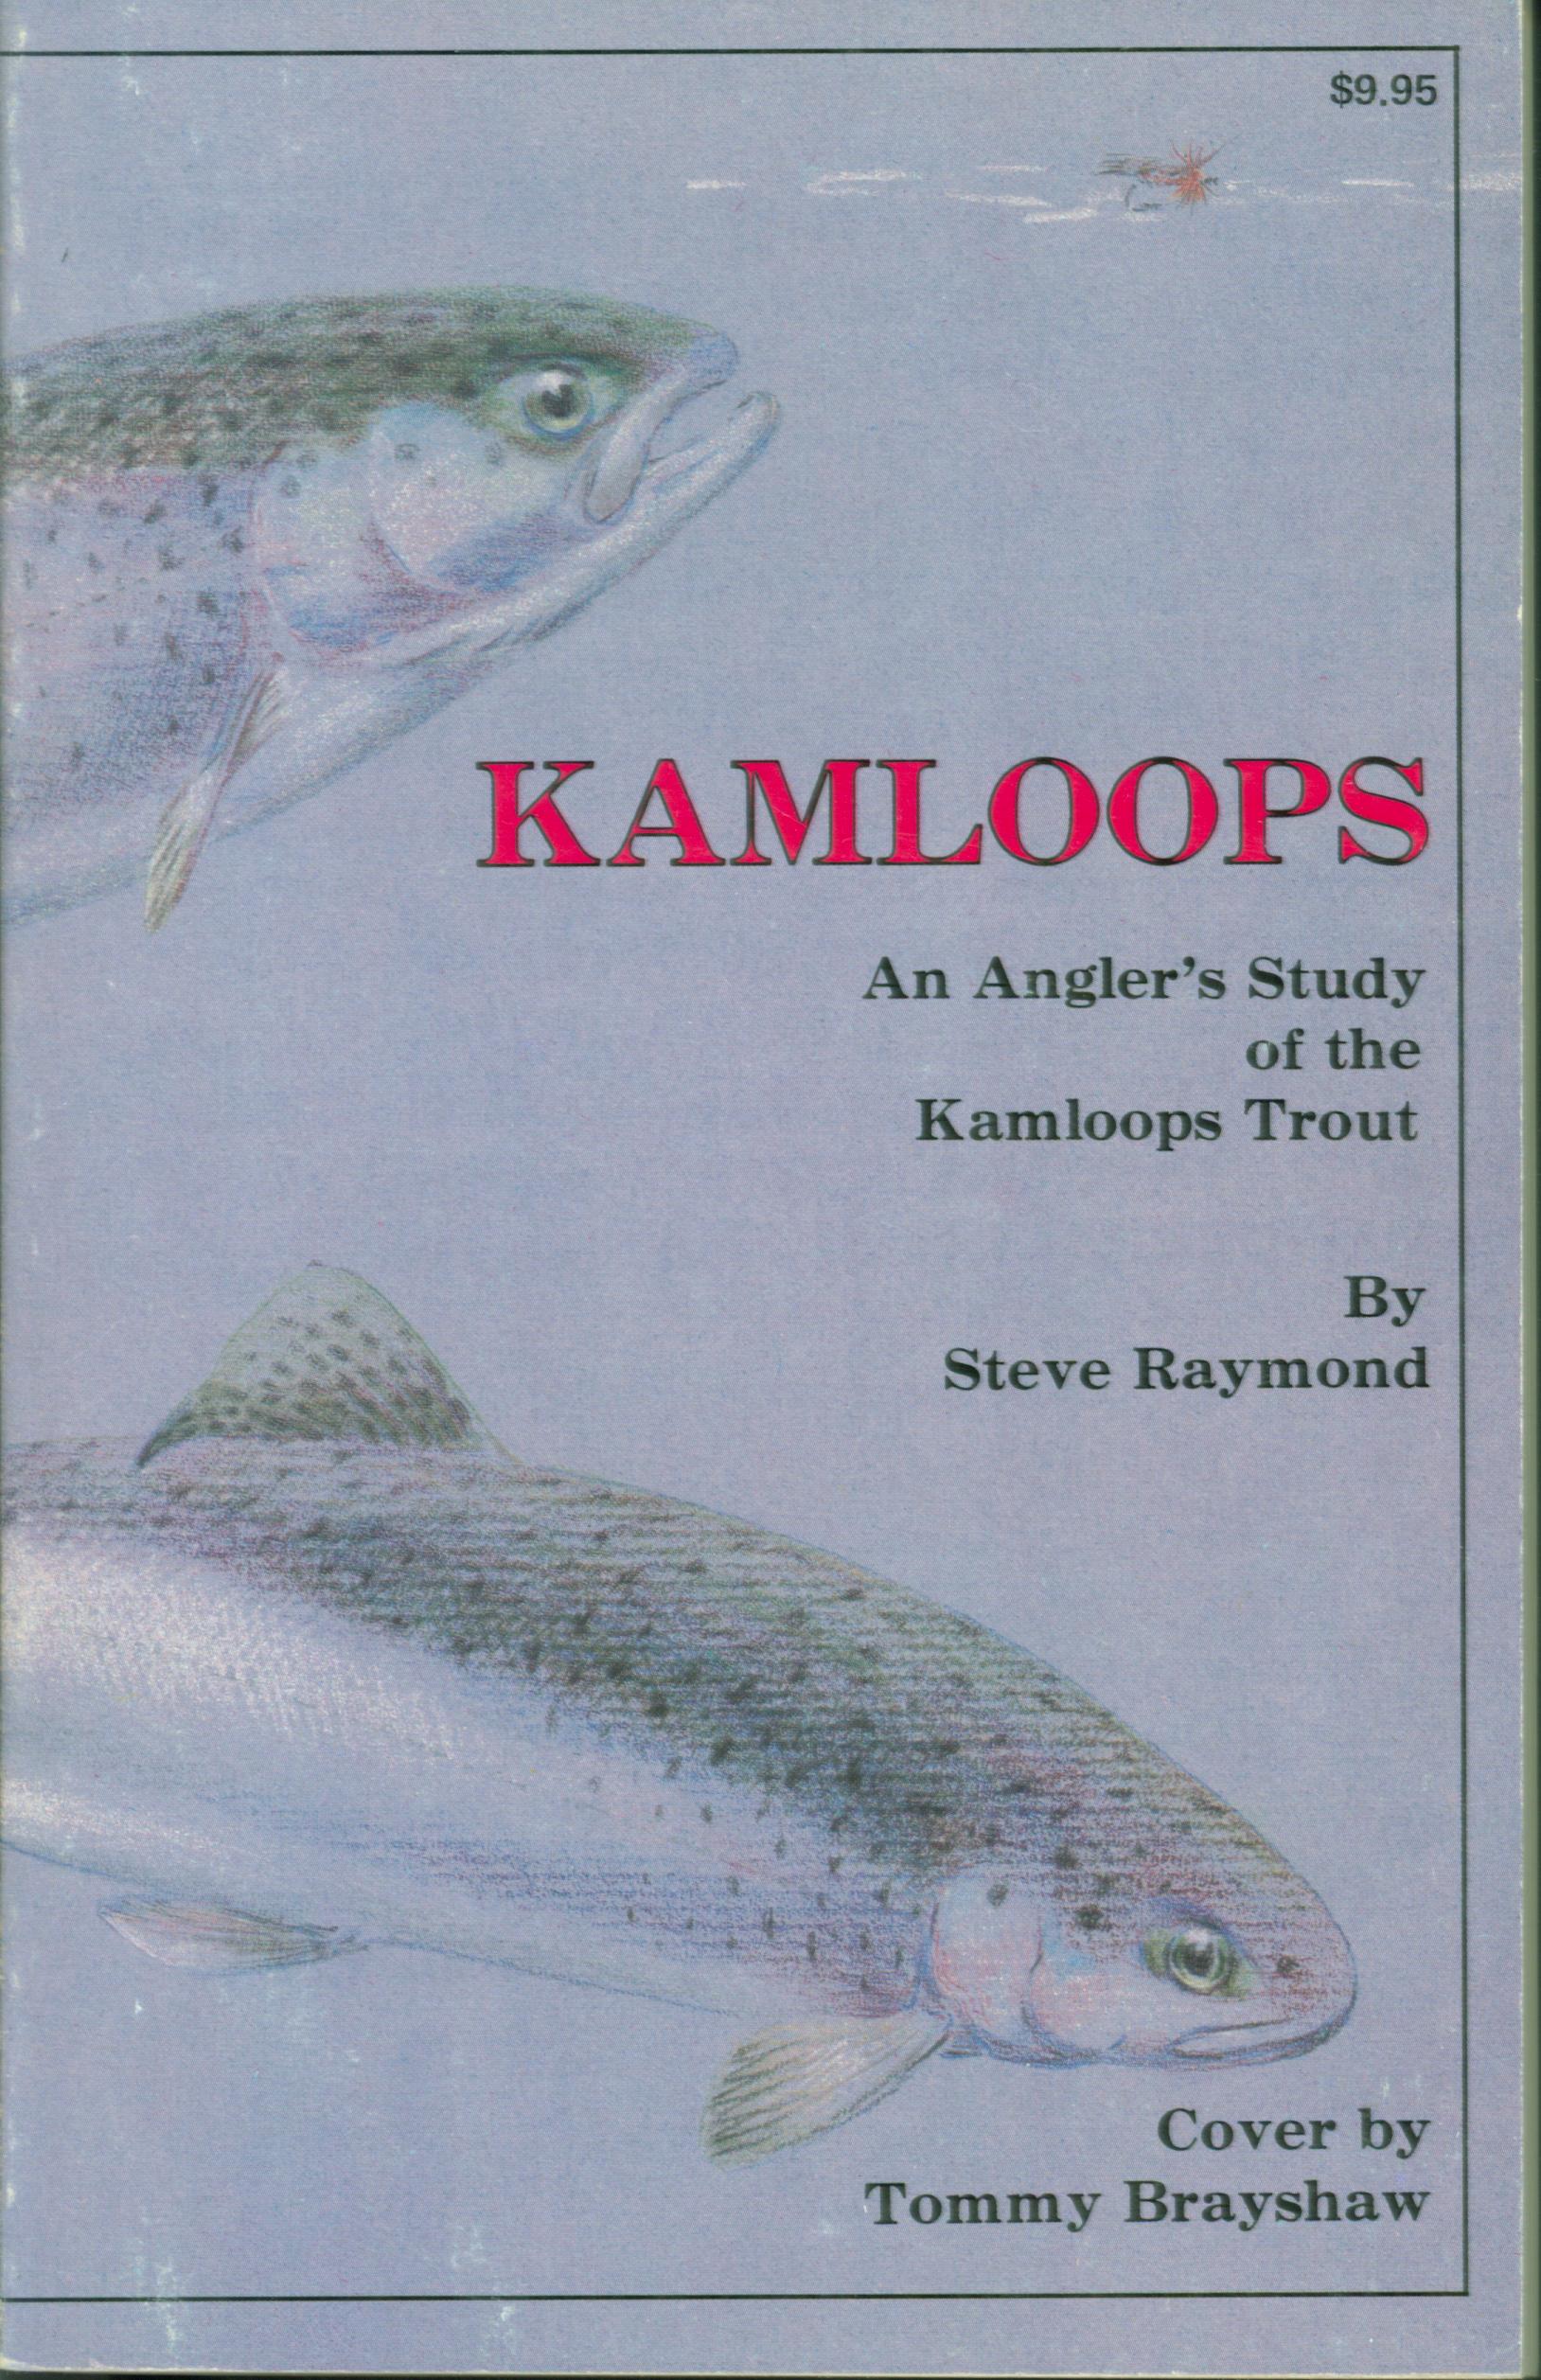 KAMLOOPS--an angler's study of the Sloops trout.